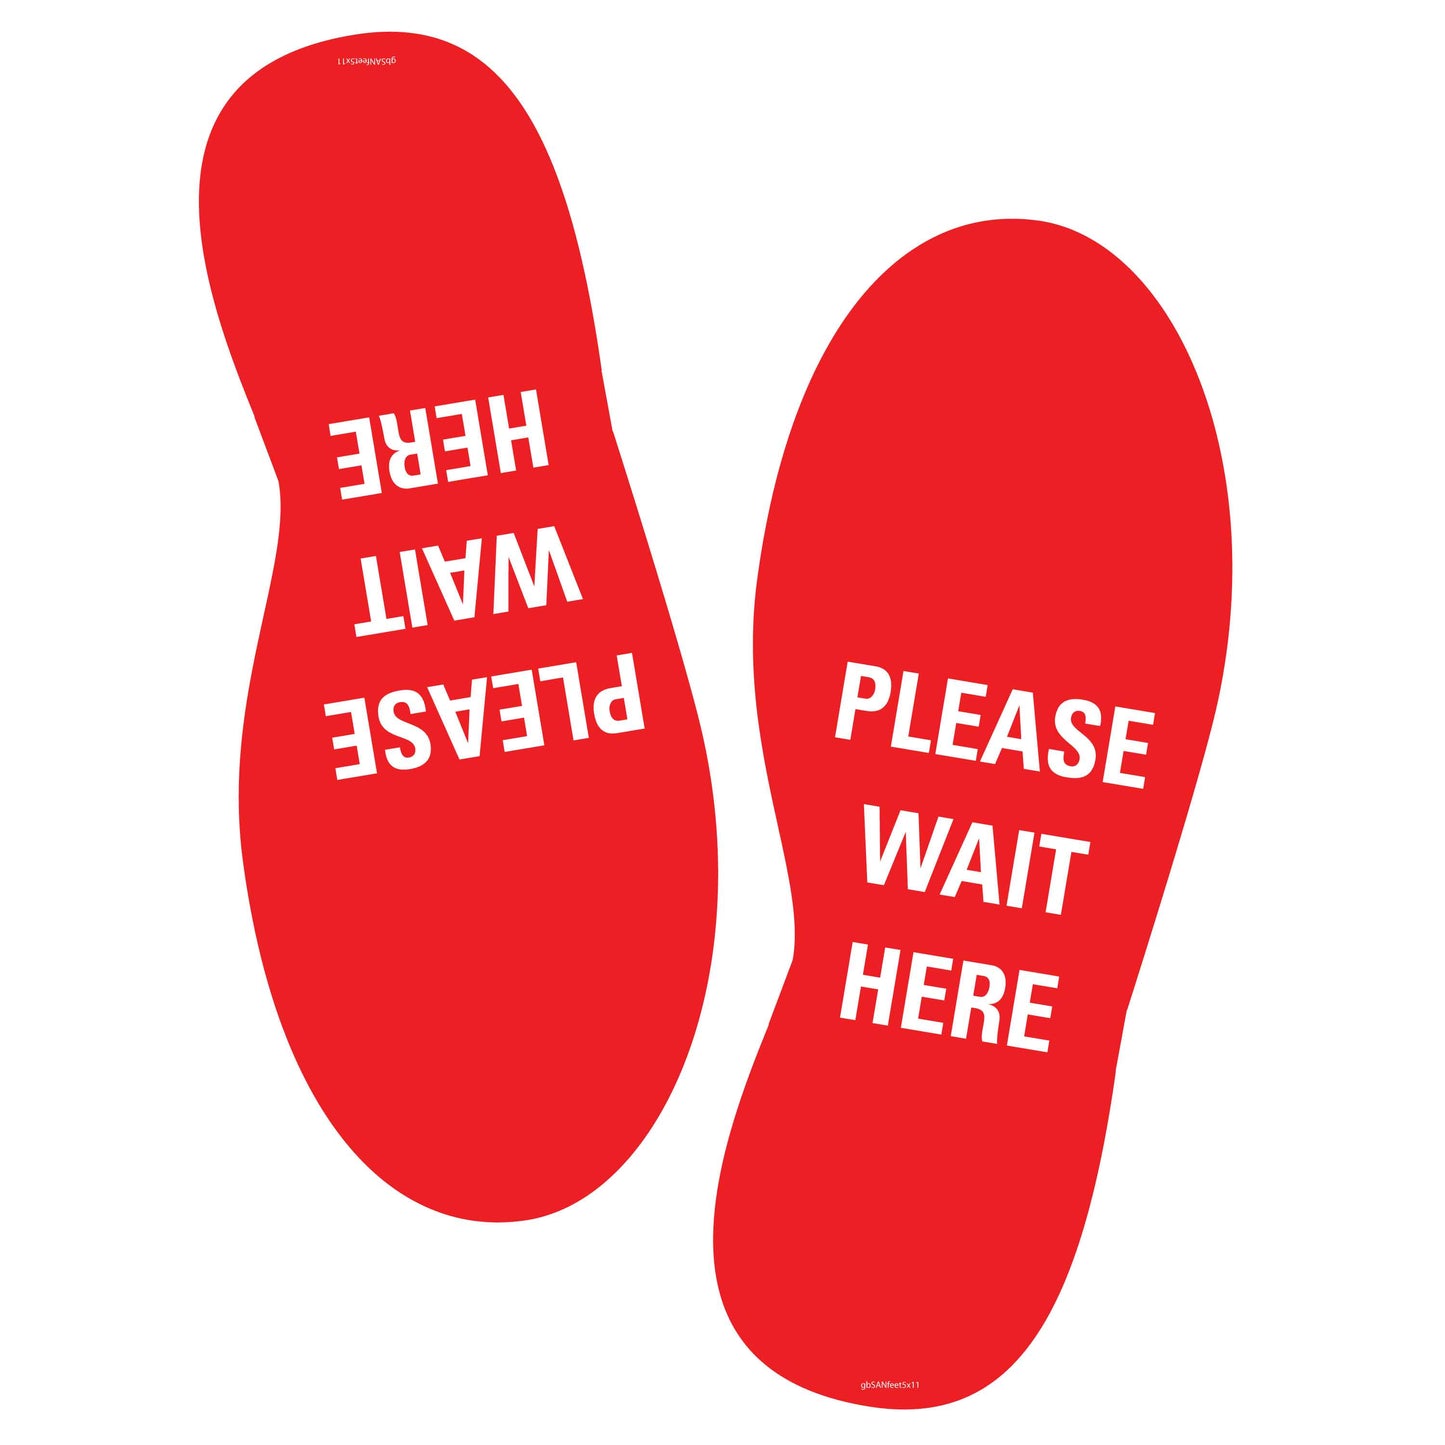 Social Distance Stand Here Feet Decal. 5 inches by 11 inches in size. 